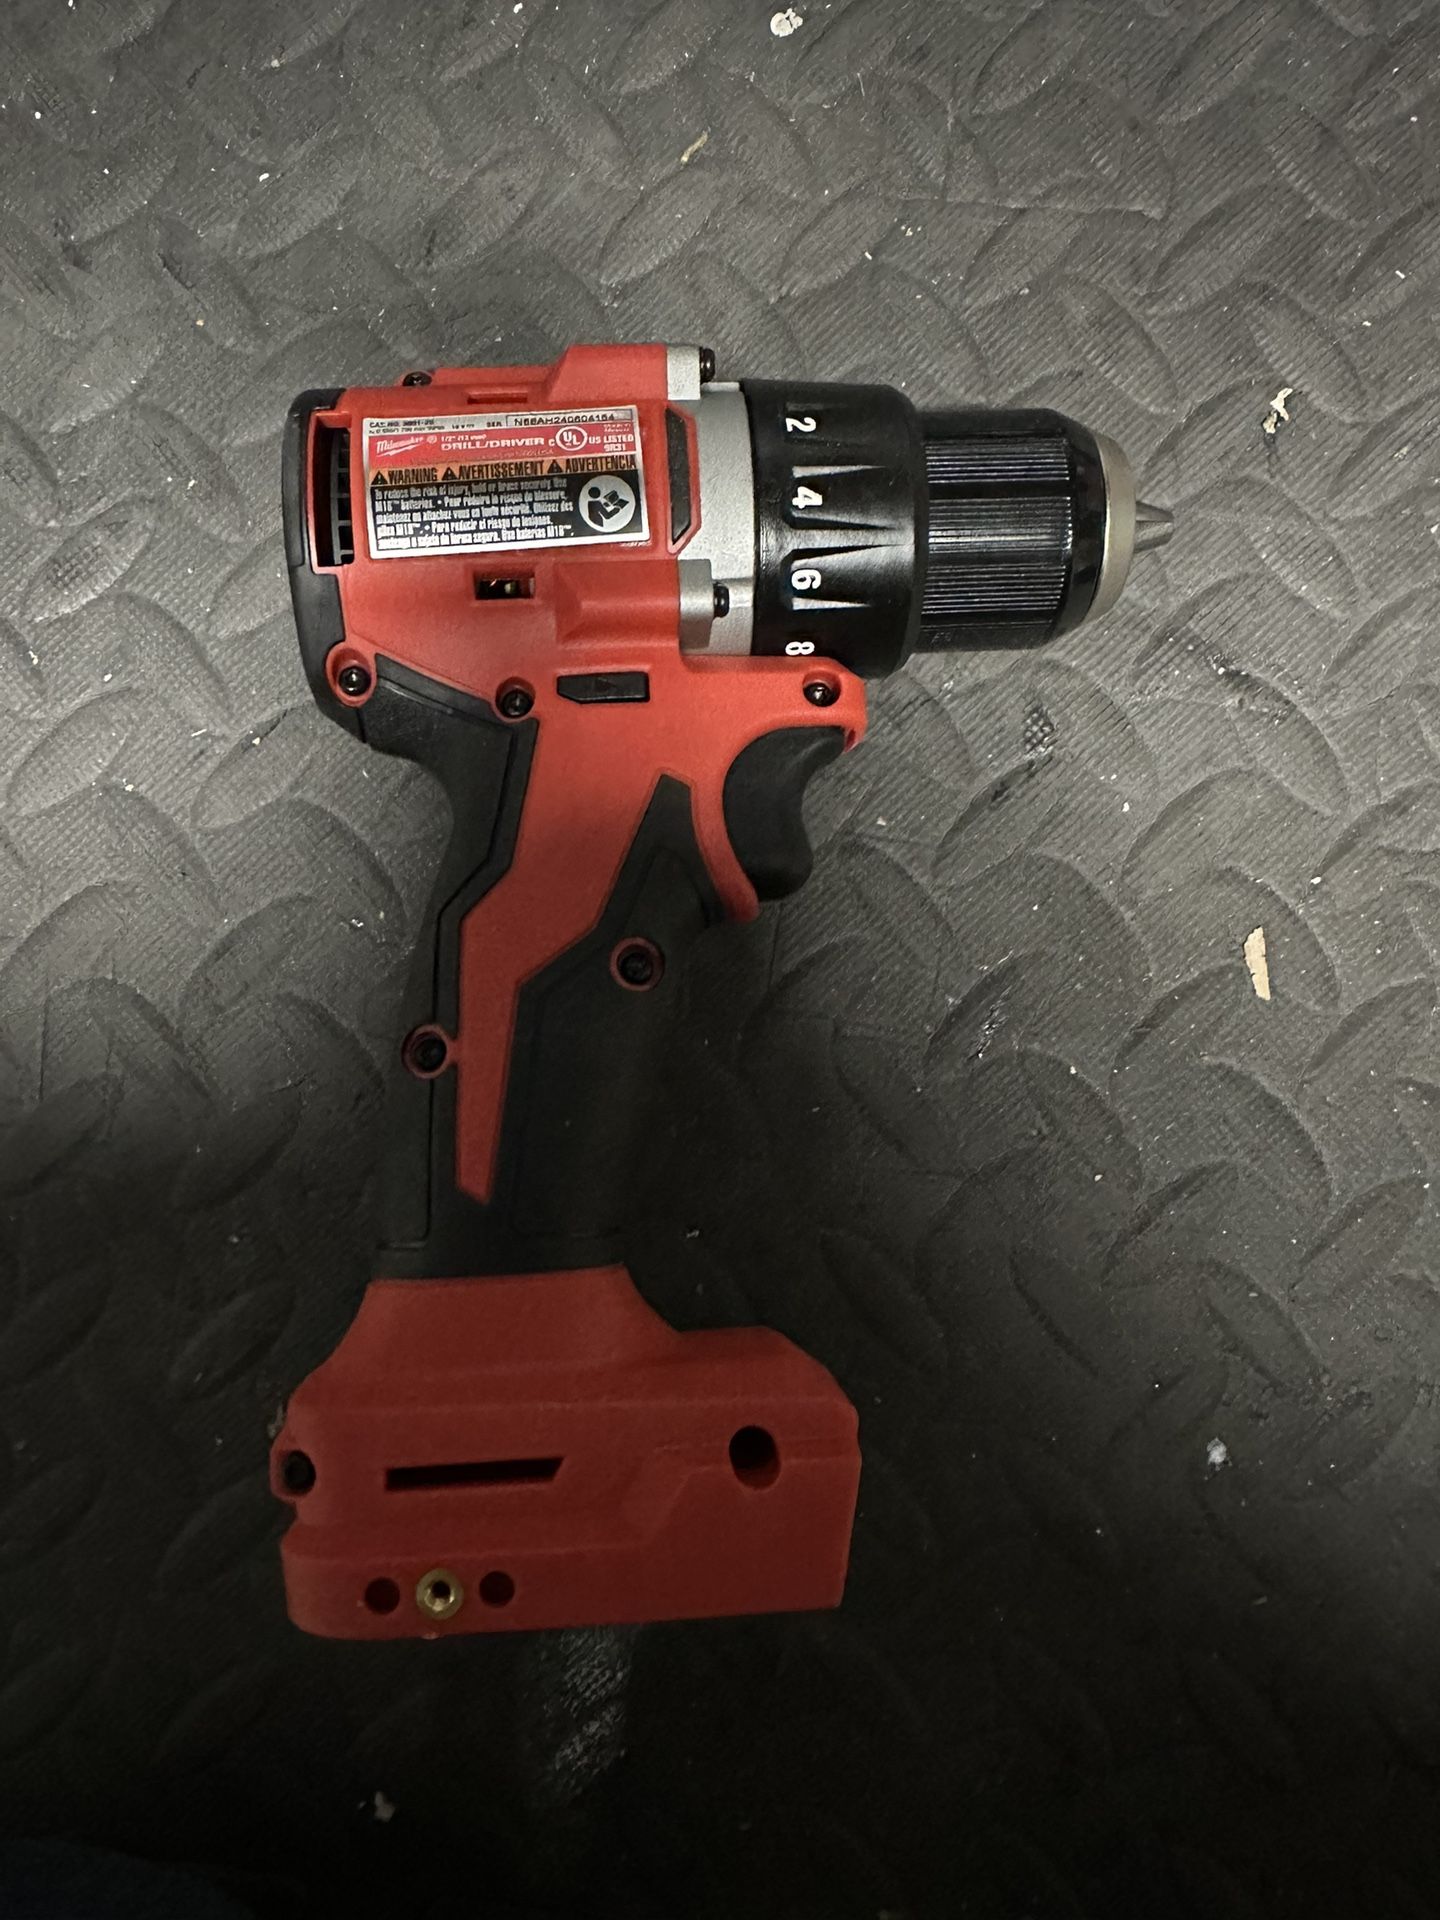 M18 18V Lithium-lon Brushless Cordless 1/2 in. Compact Drill/Driver (Tool-Only)